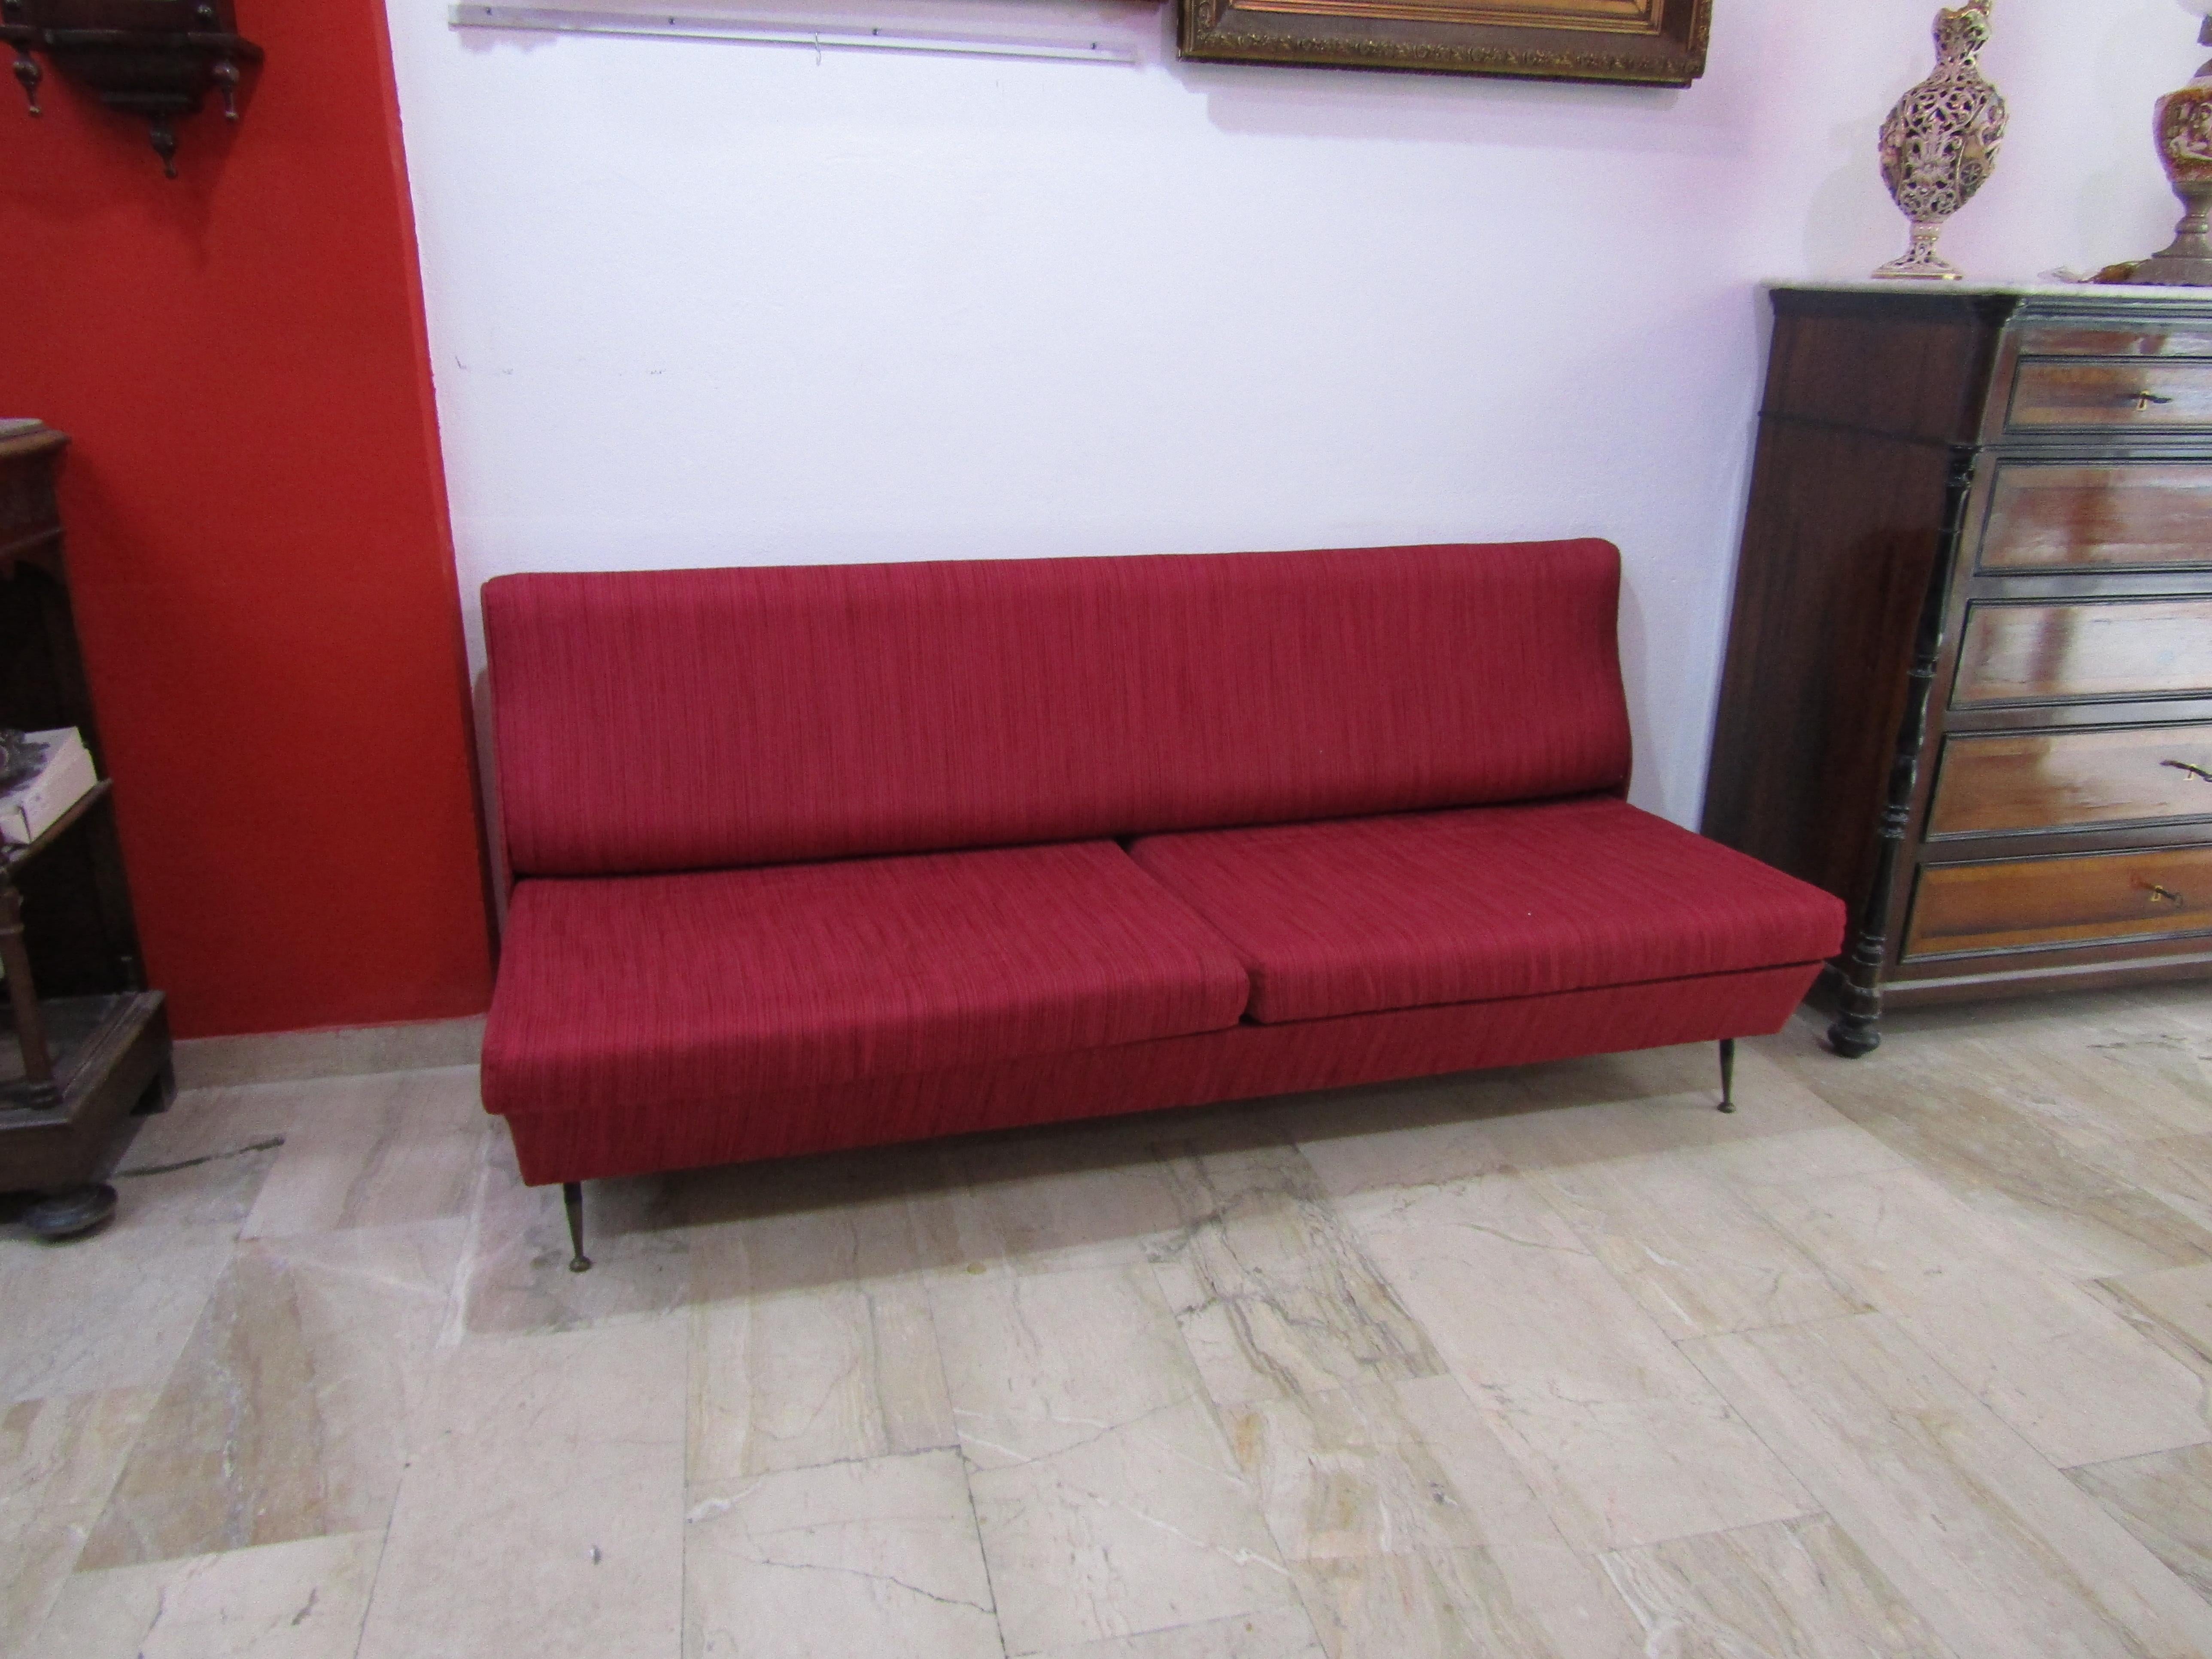 Italian design sofa from the 1950s and 1960s. Zanuso in style, particular line and construction. Chaise longue covered in red fabric. Measures: Seat height 40 cm.
       